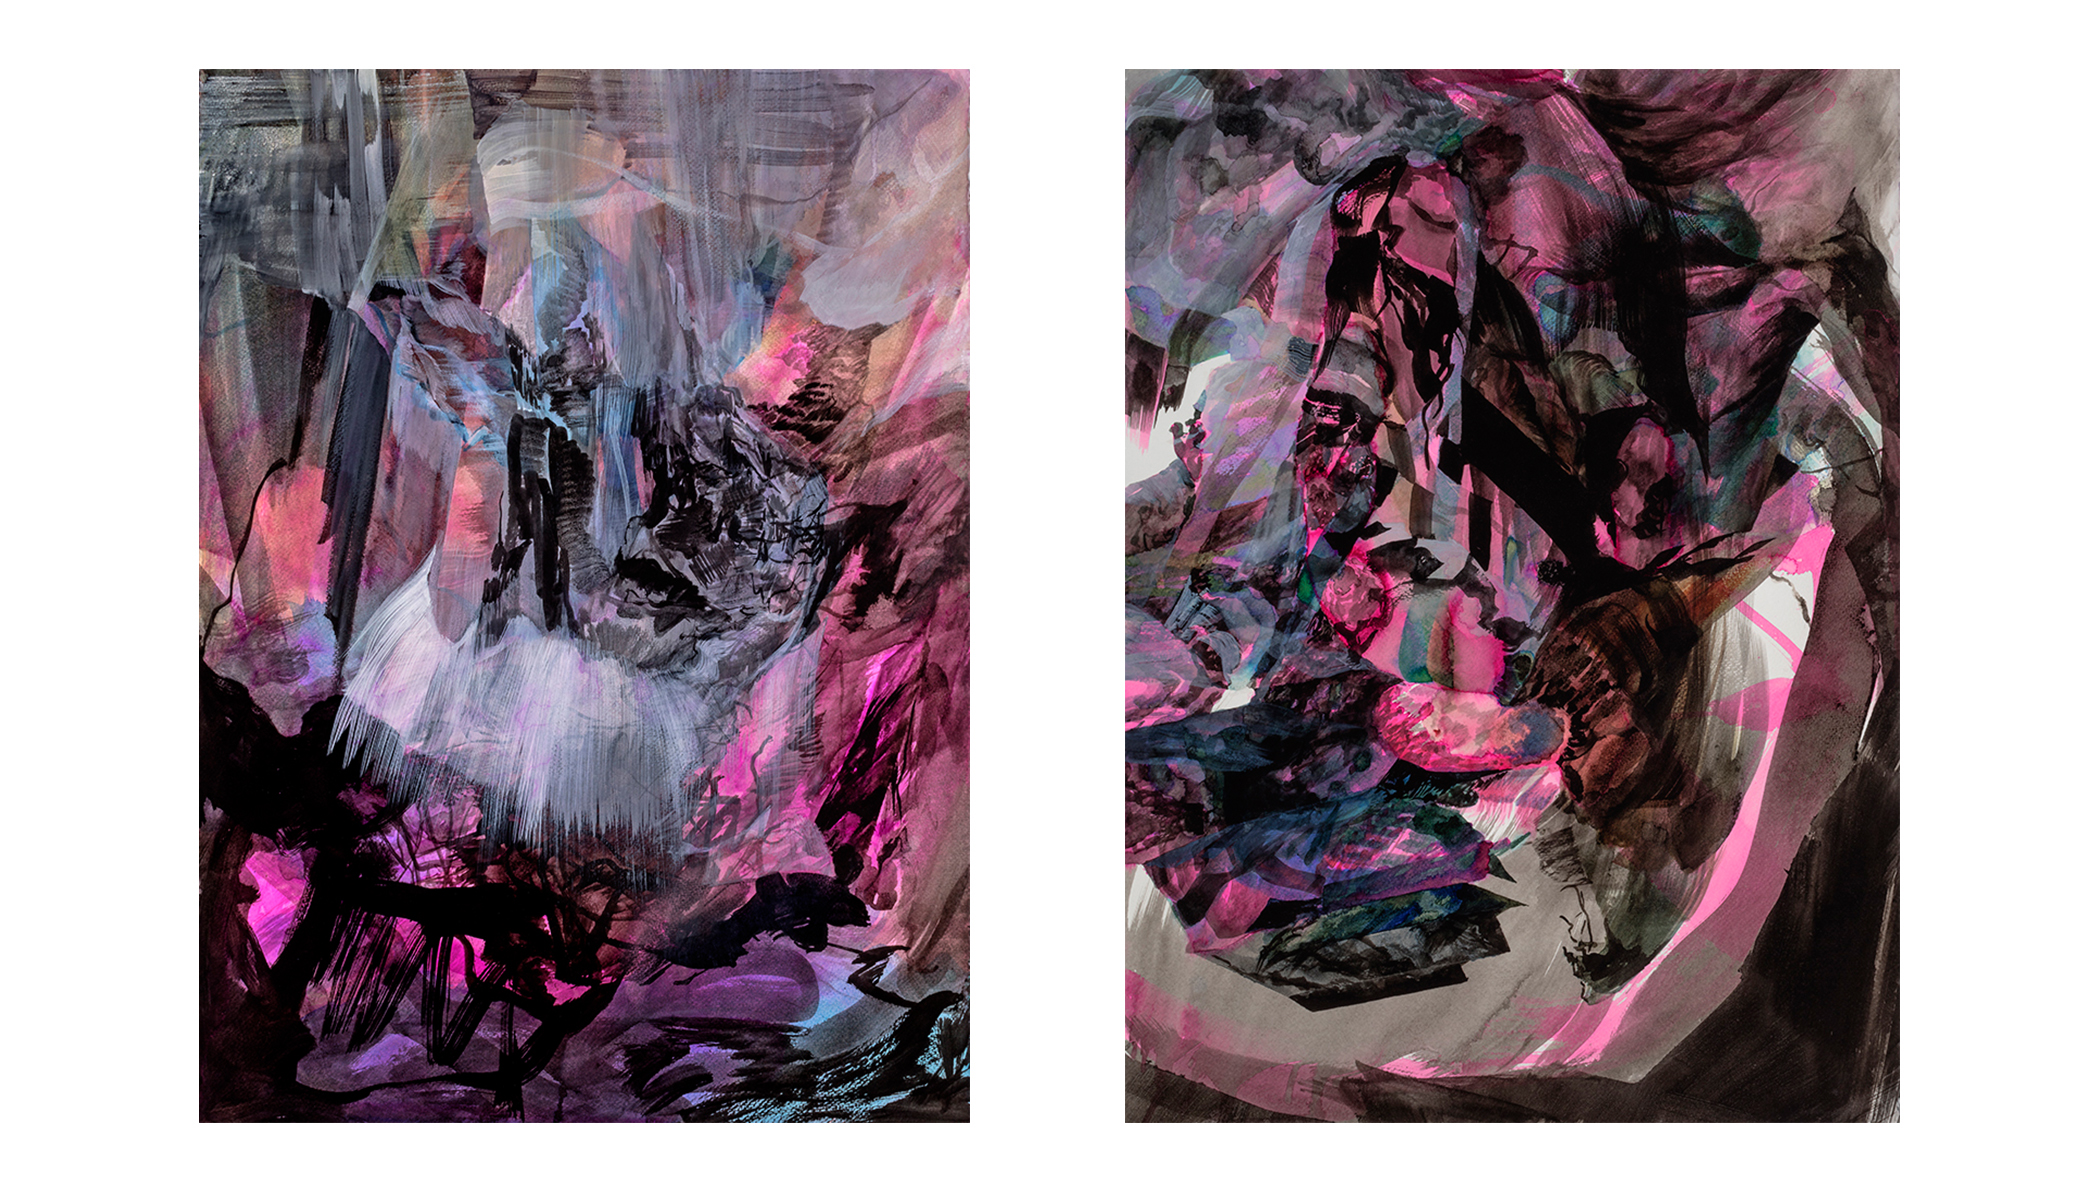   Scylla and Charybdis - diptych , 2015   watercolour and ink on paper  30" x 44" 